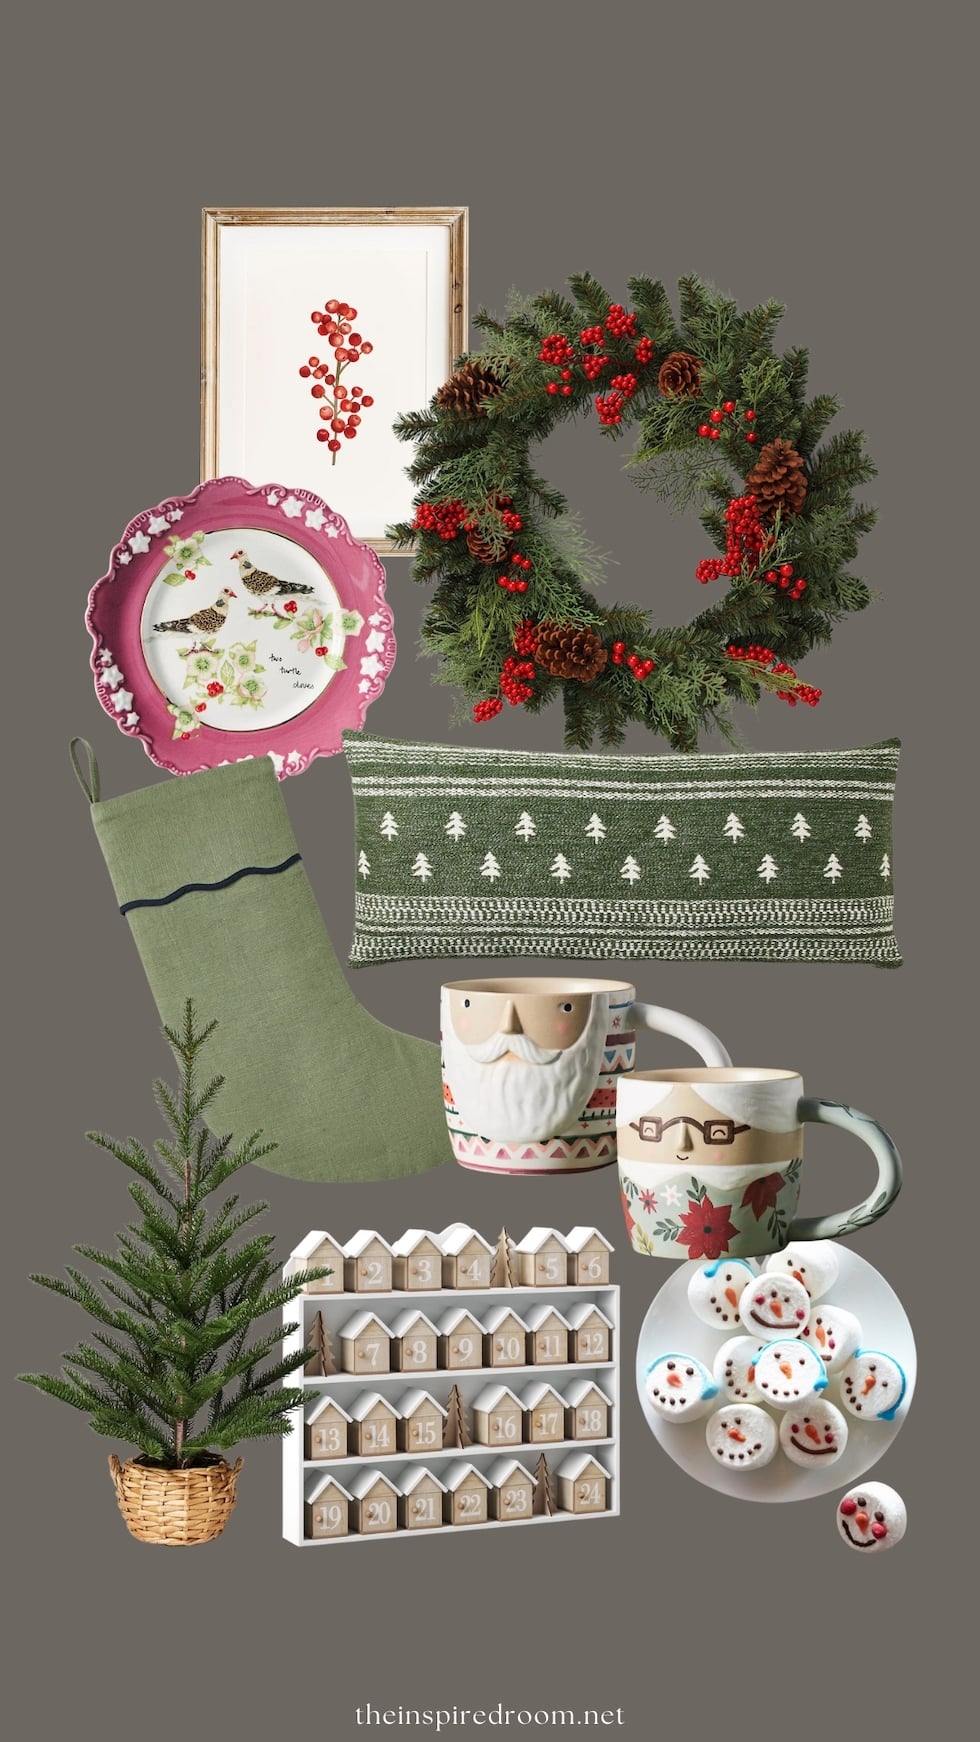 The Inspired Room Christmas Shop